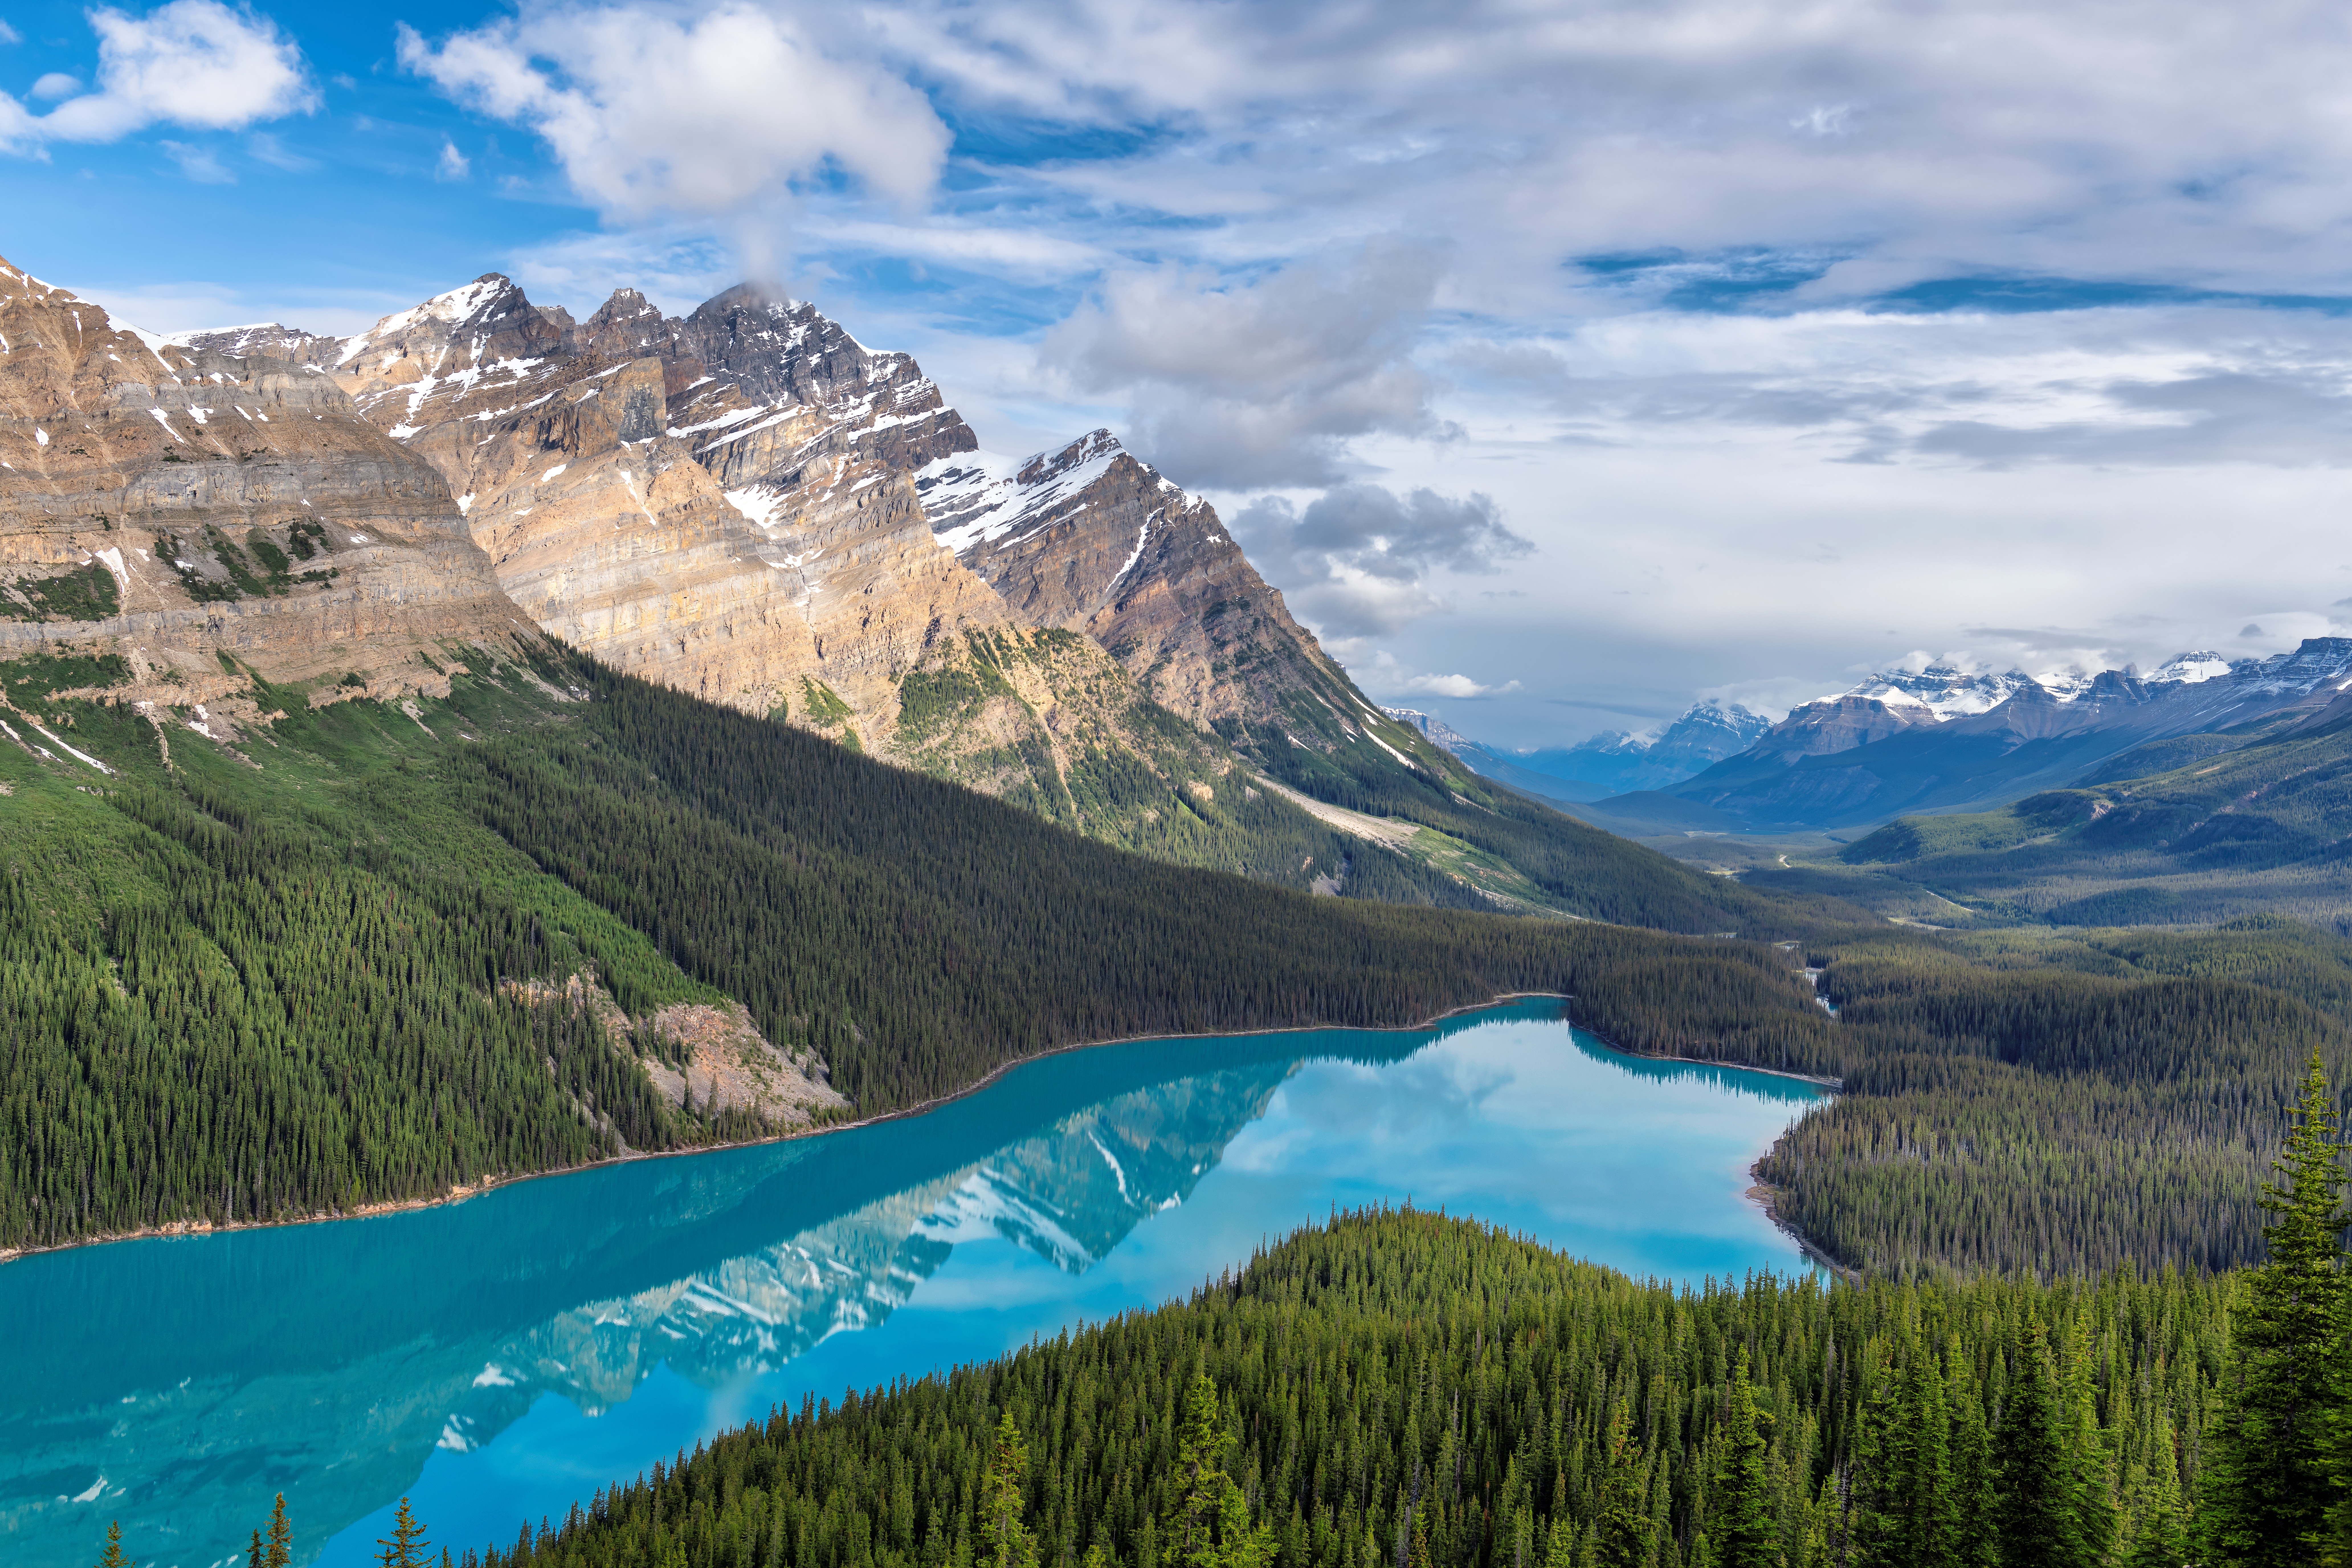 An aerial shot of Peyto Lake in Banff National Park. This lake is known for being shaped like a wolf or a fox face profile.